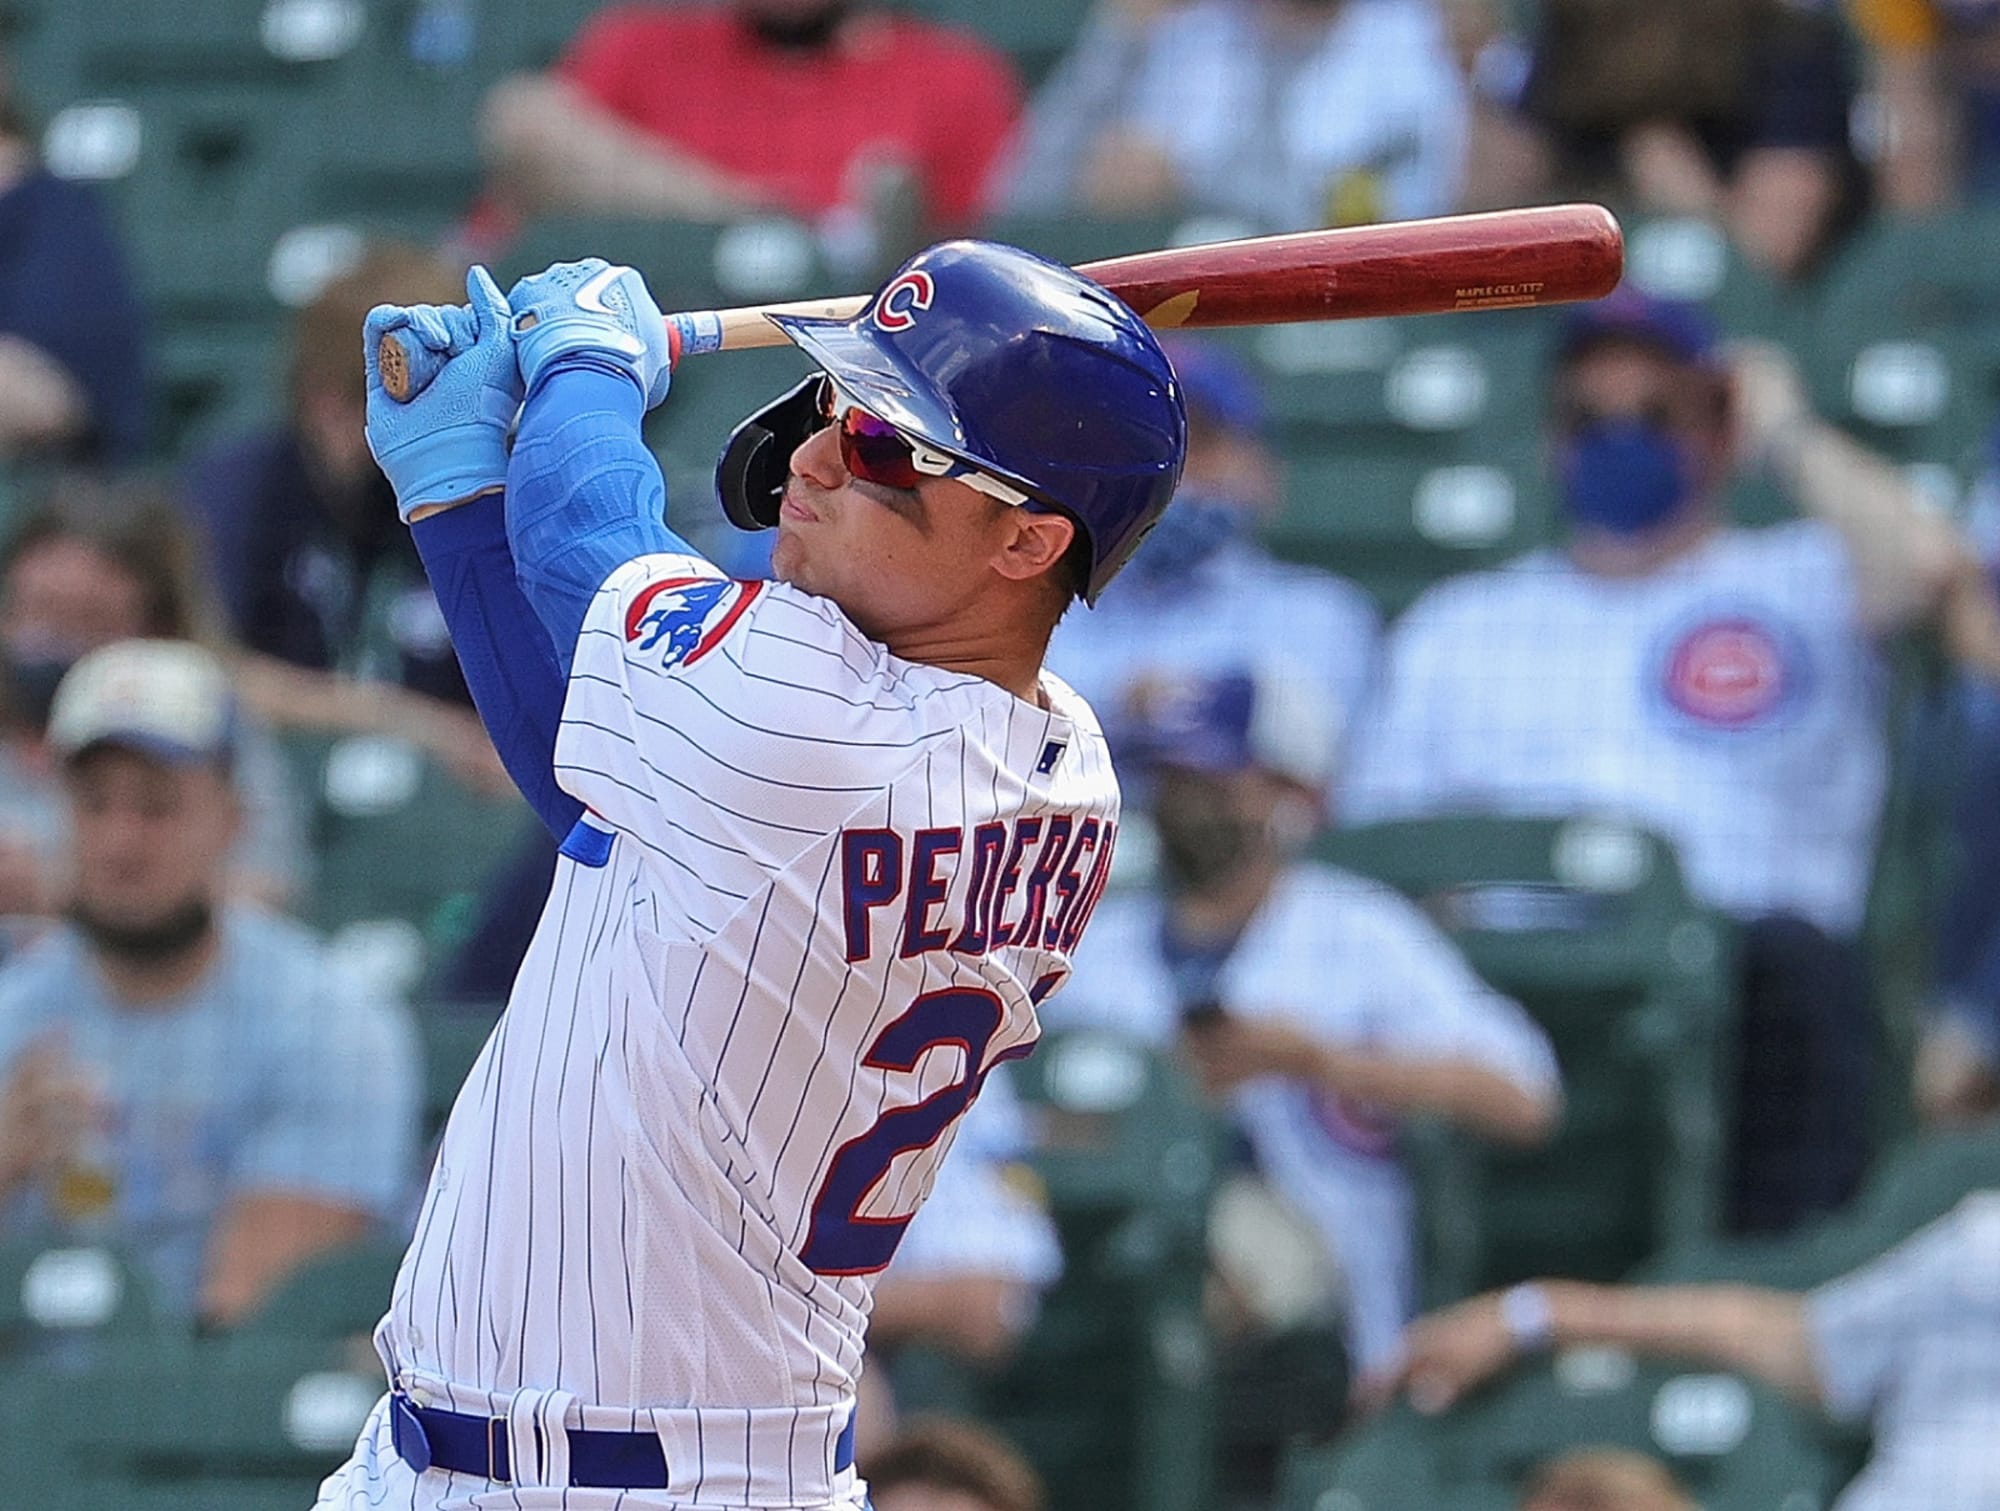 The Altanta Braves have acquired Joc Pederson from the Cubs in